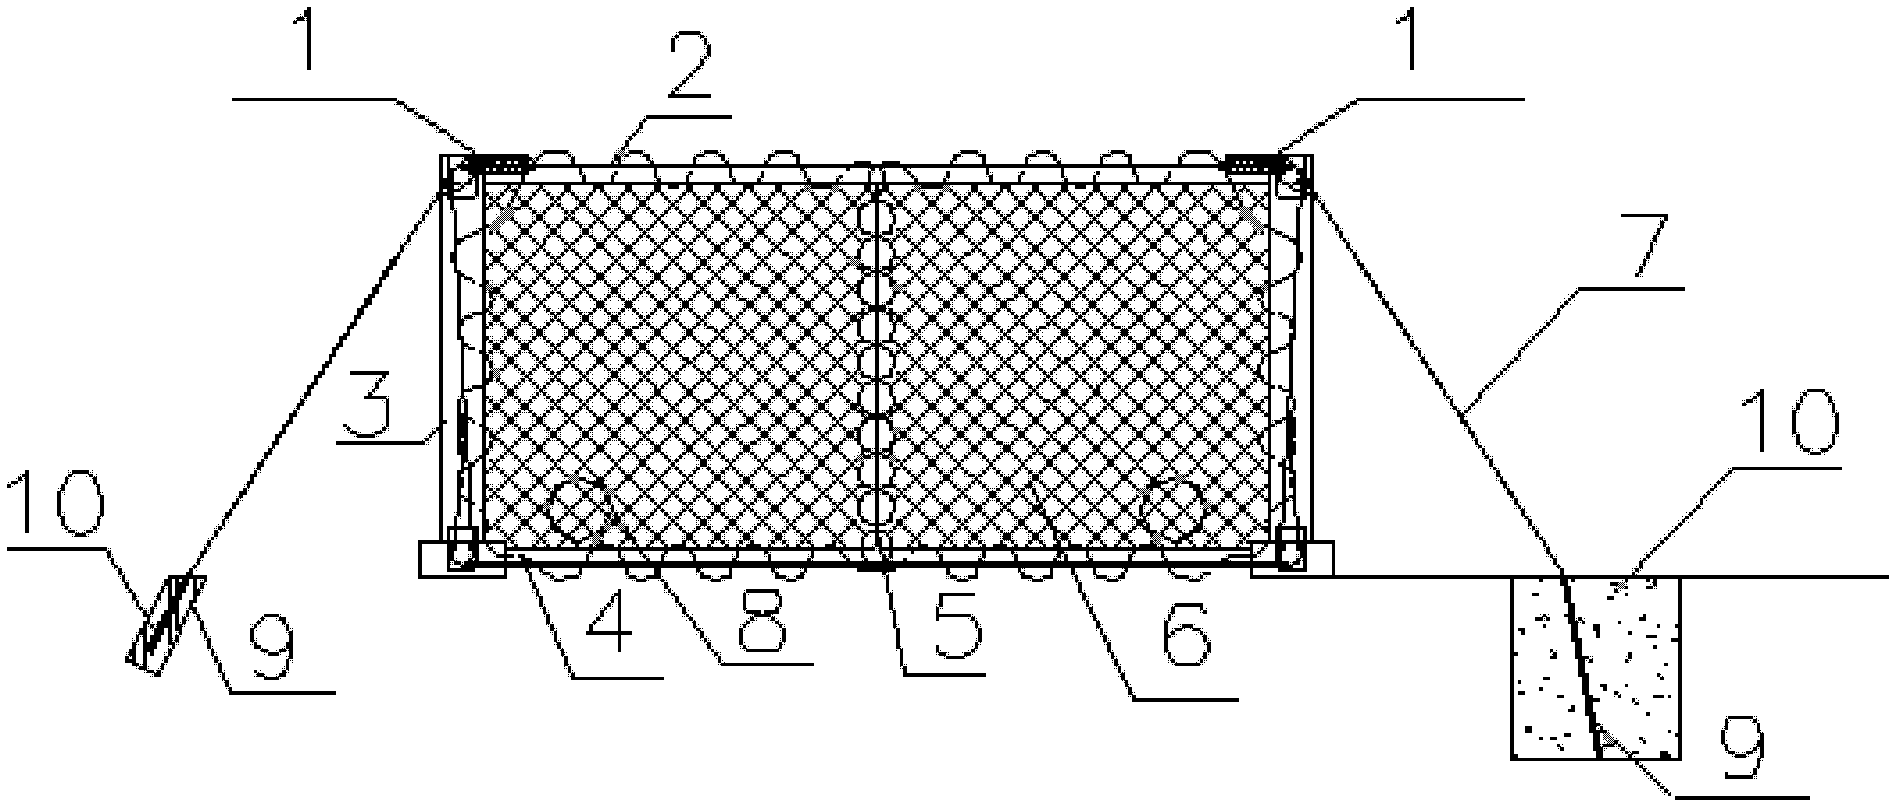 Anti-seismic flexible passive protecting screen system for side slope